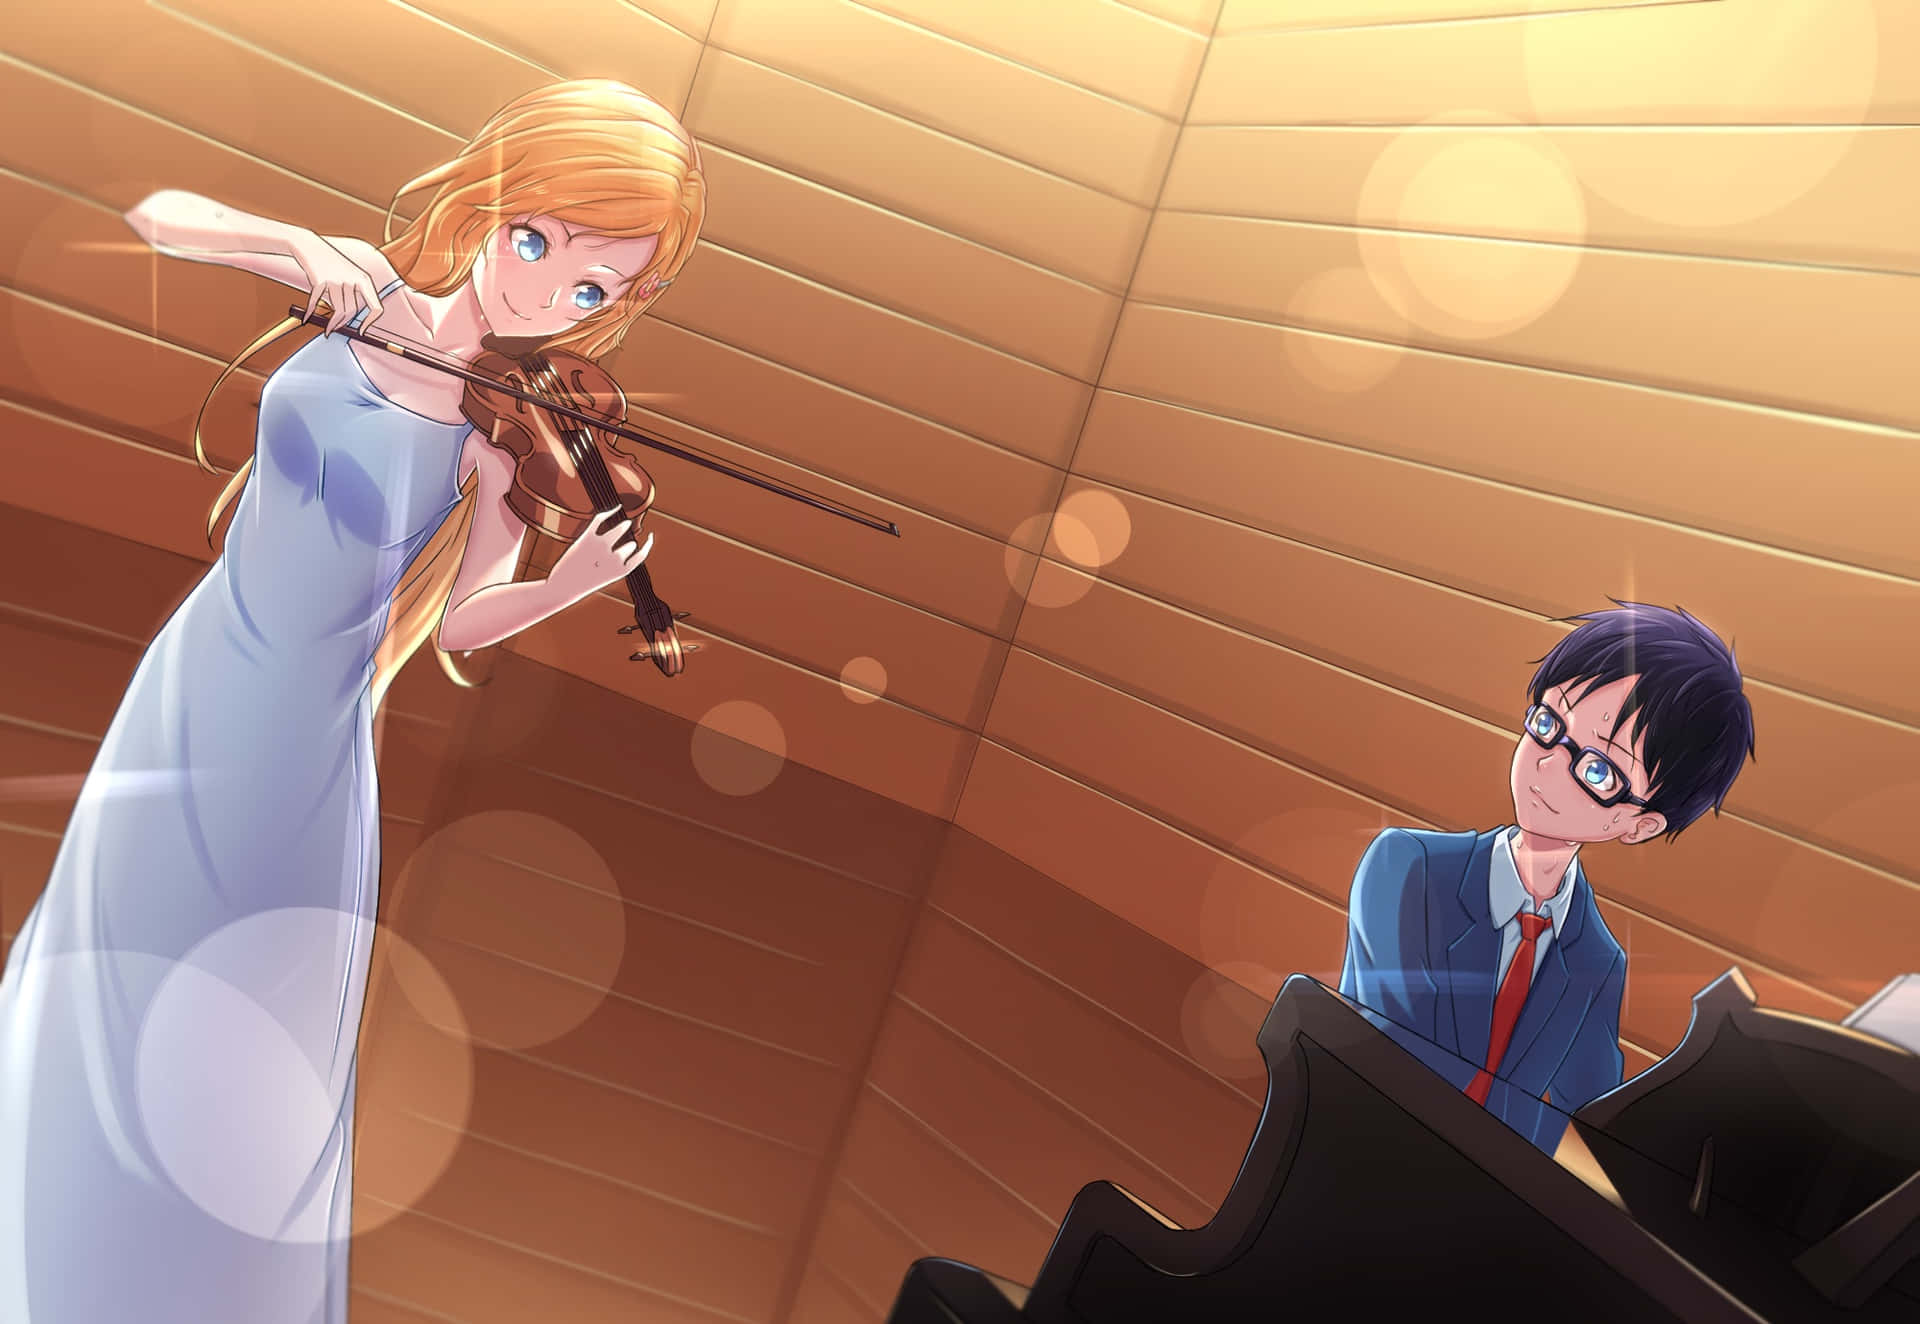 A melancholic farewell in "Your Lie In April"